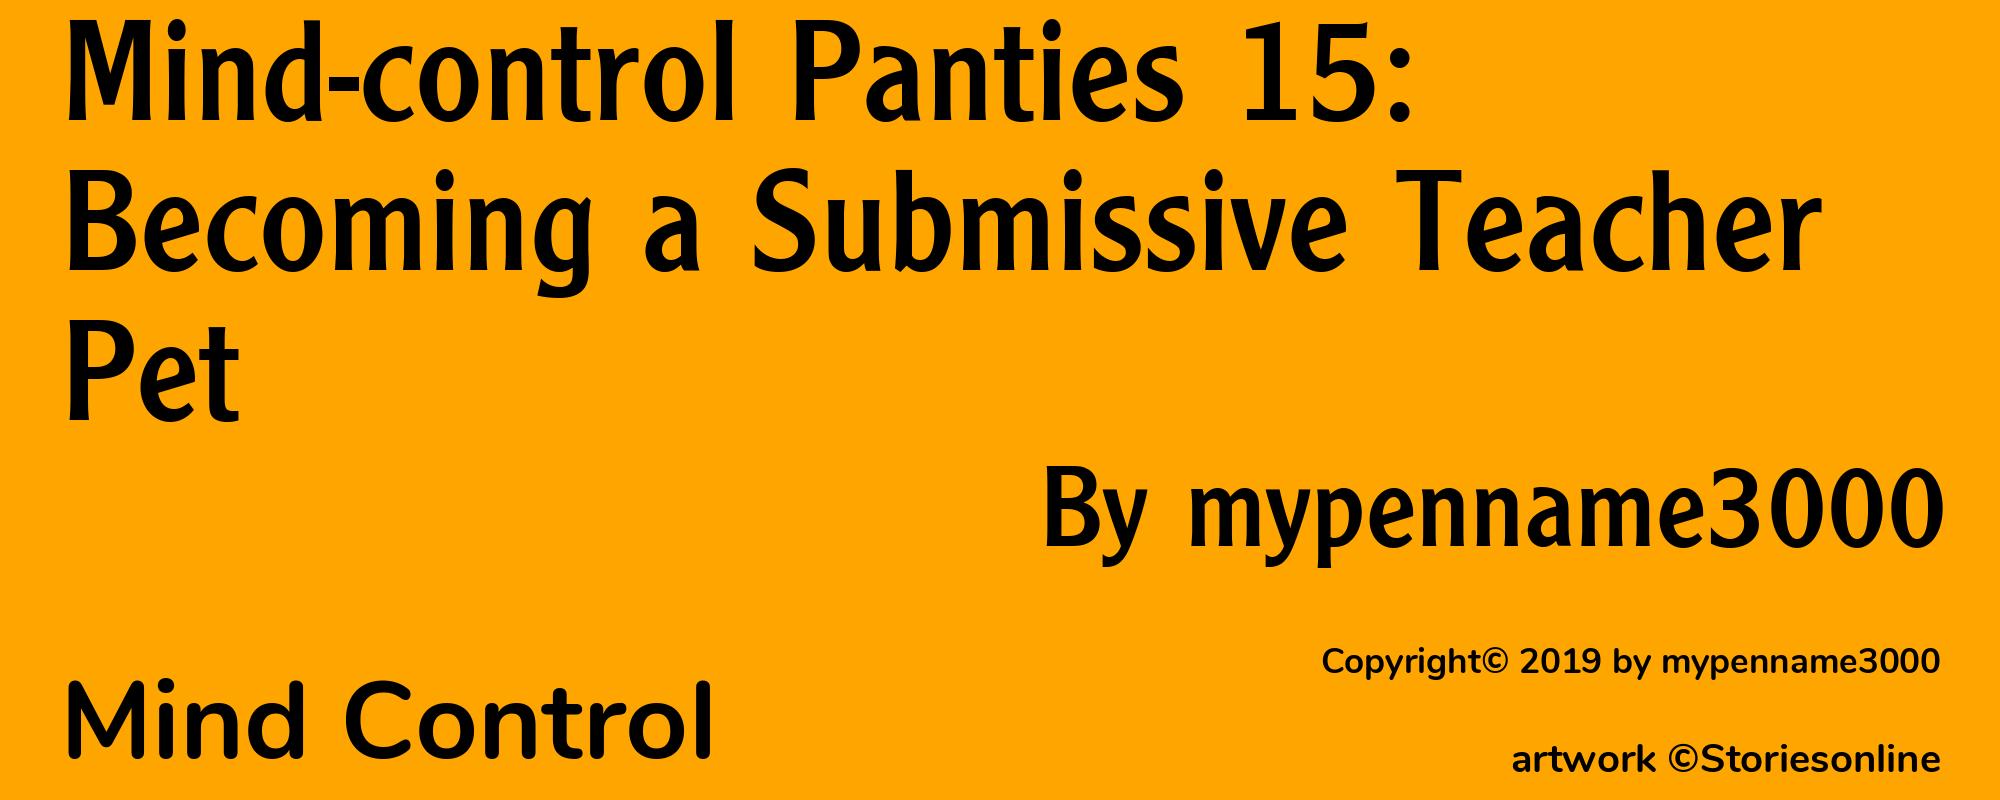 Mind-control Panties 15: Becoming a Submissive Teacher Pet - Cover